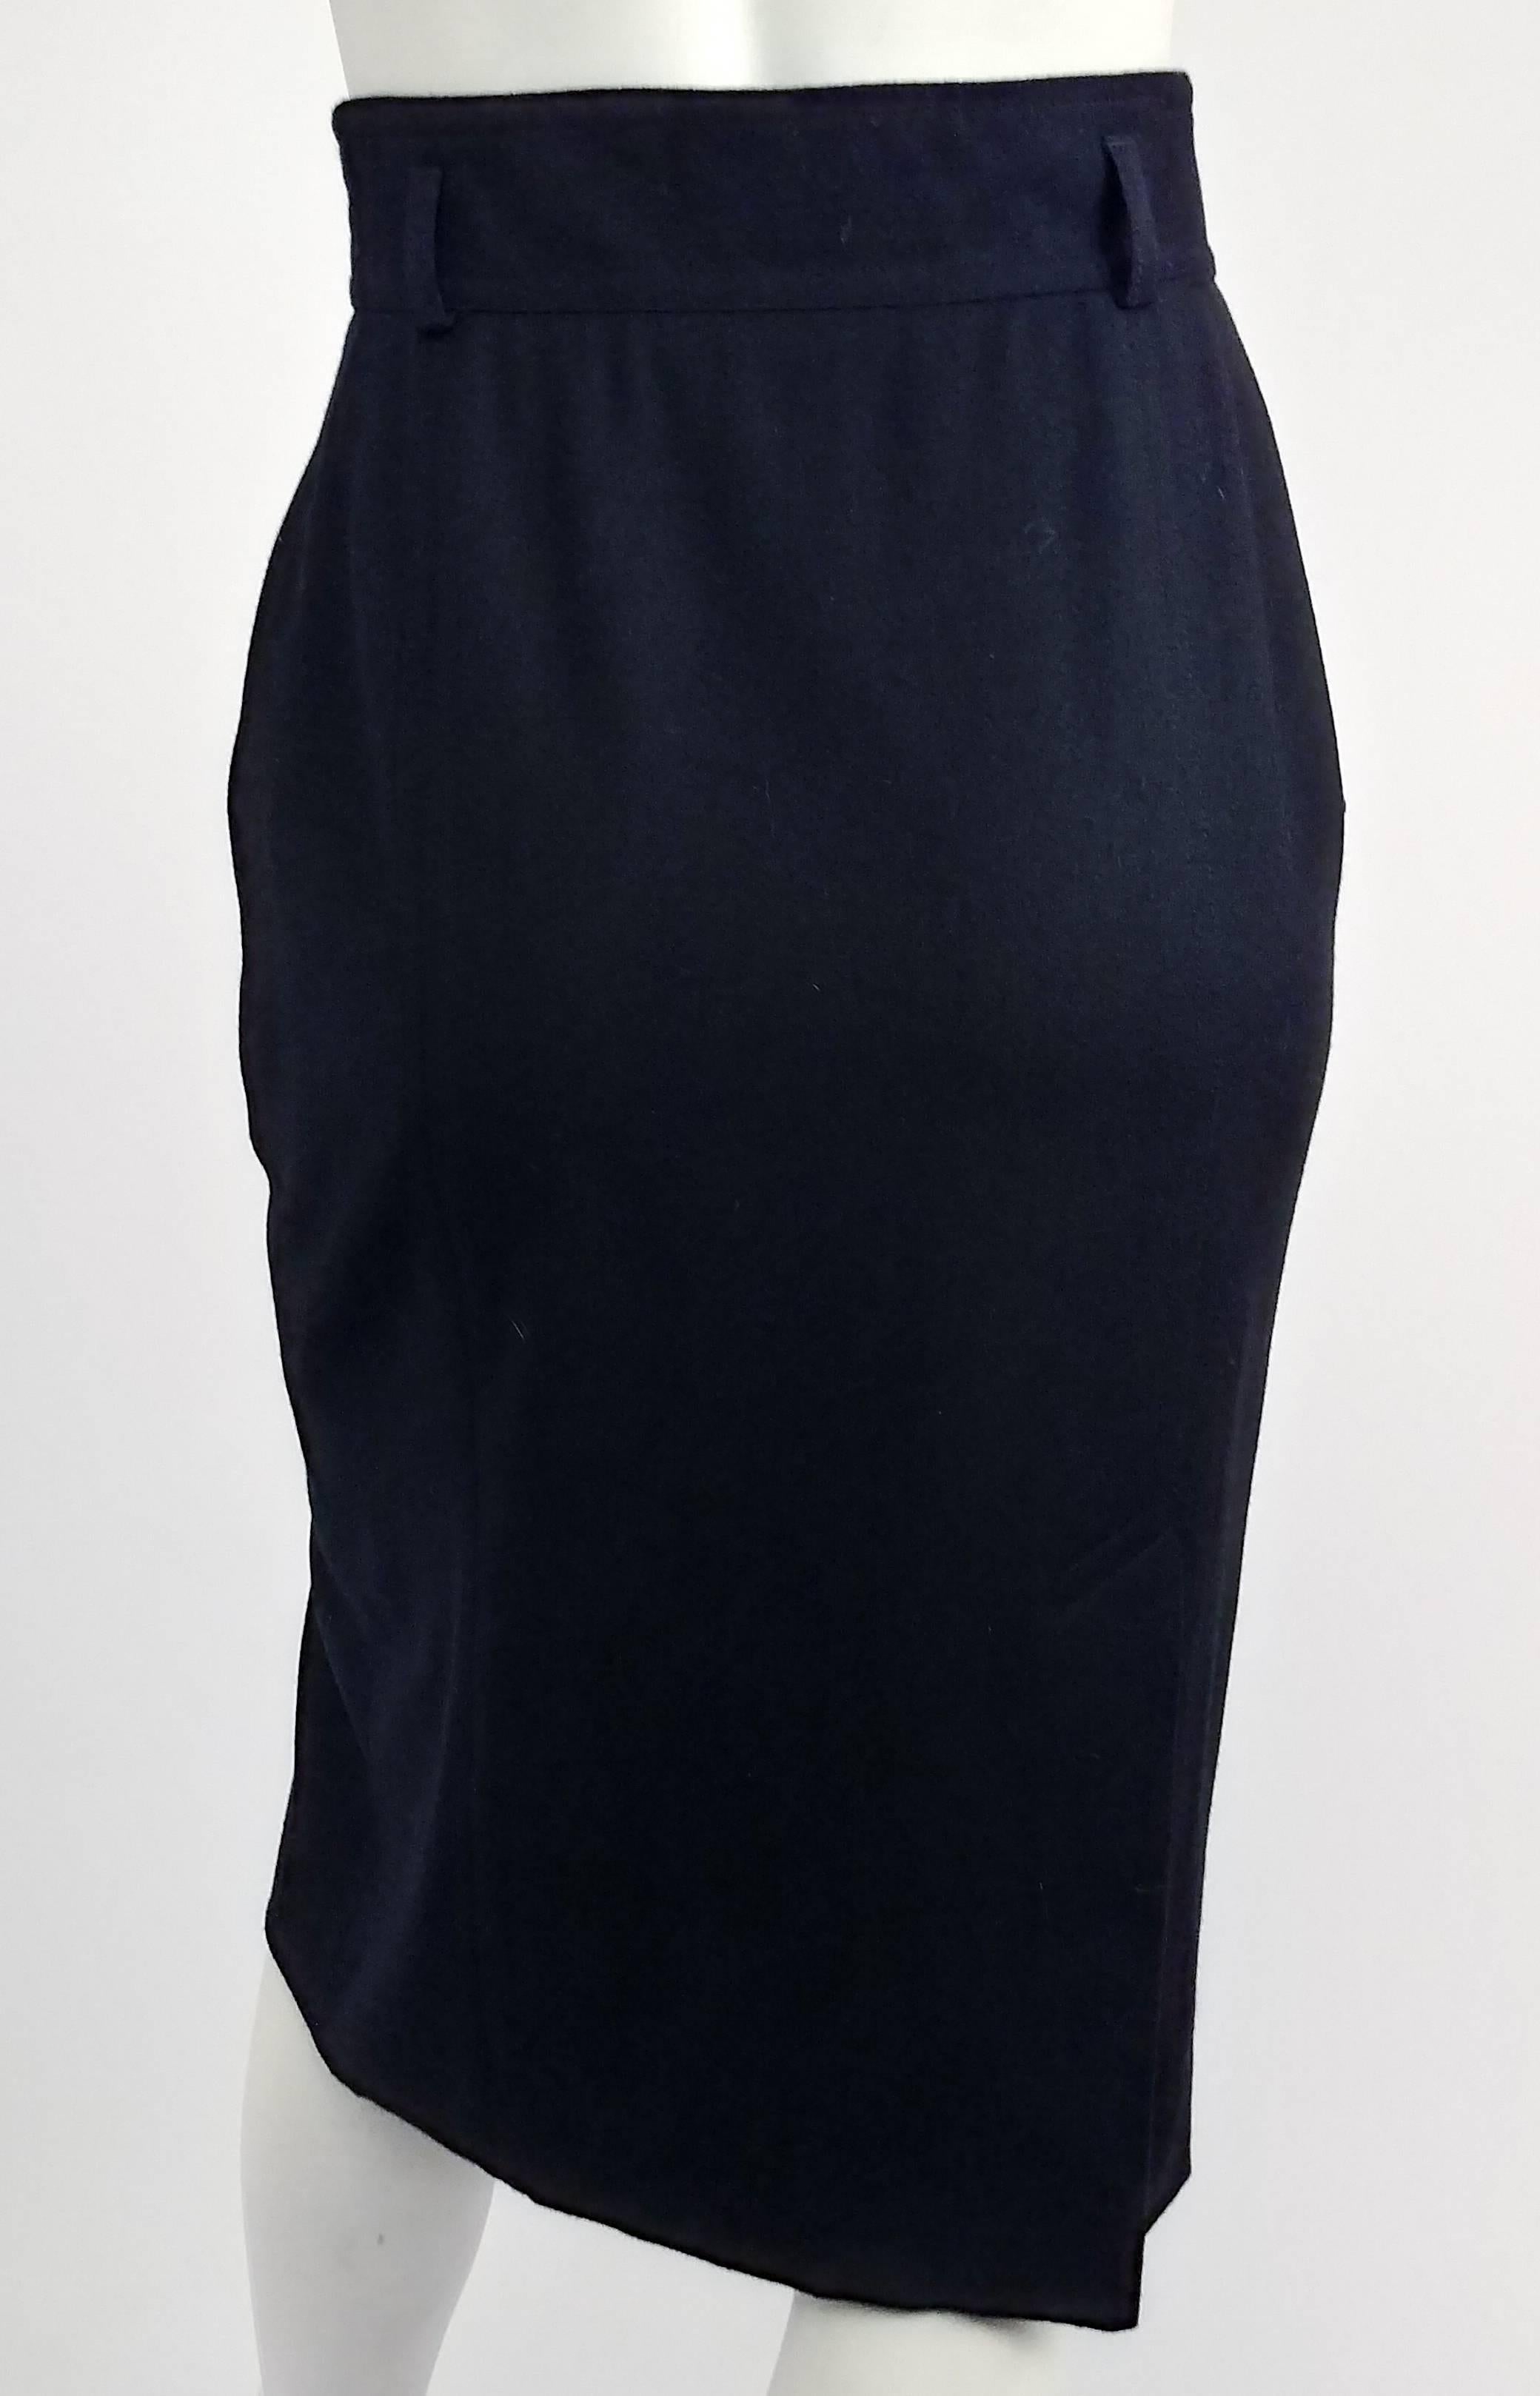 1980s Escada Black Wool Skirt In Excellent Condition For Sale In San Francisco, CA